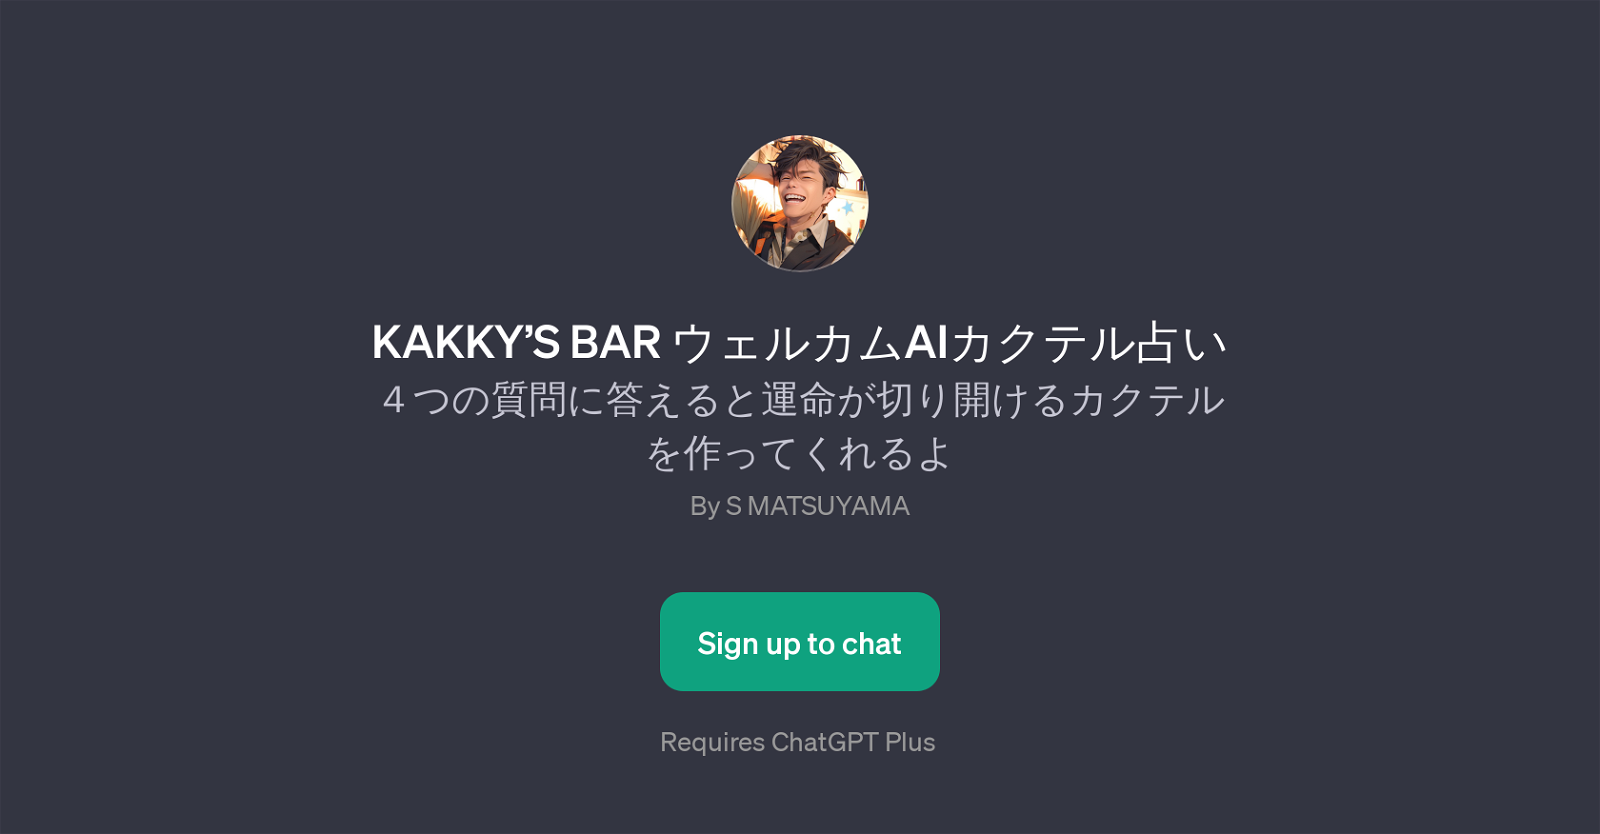 KAKKY'S BAR Welcome AI Cocktail Divination website